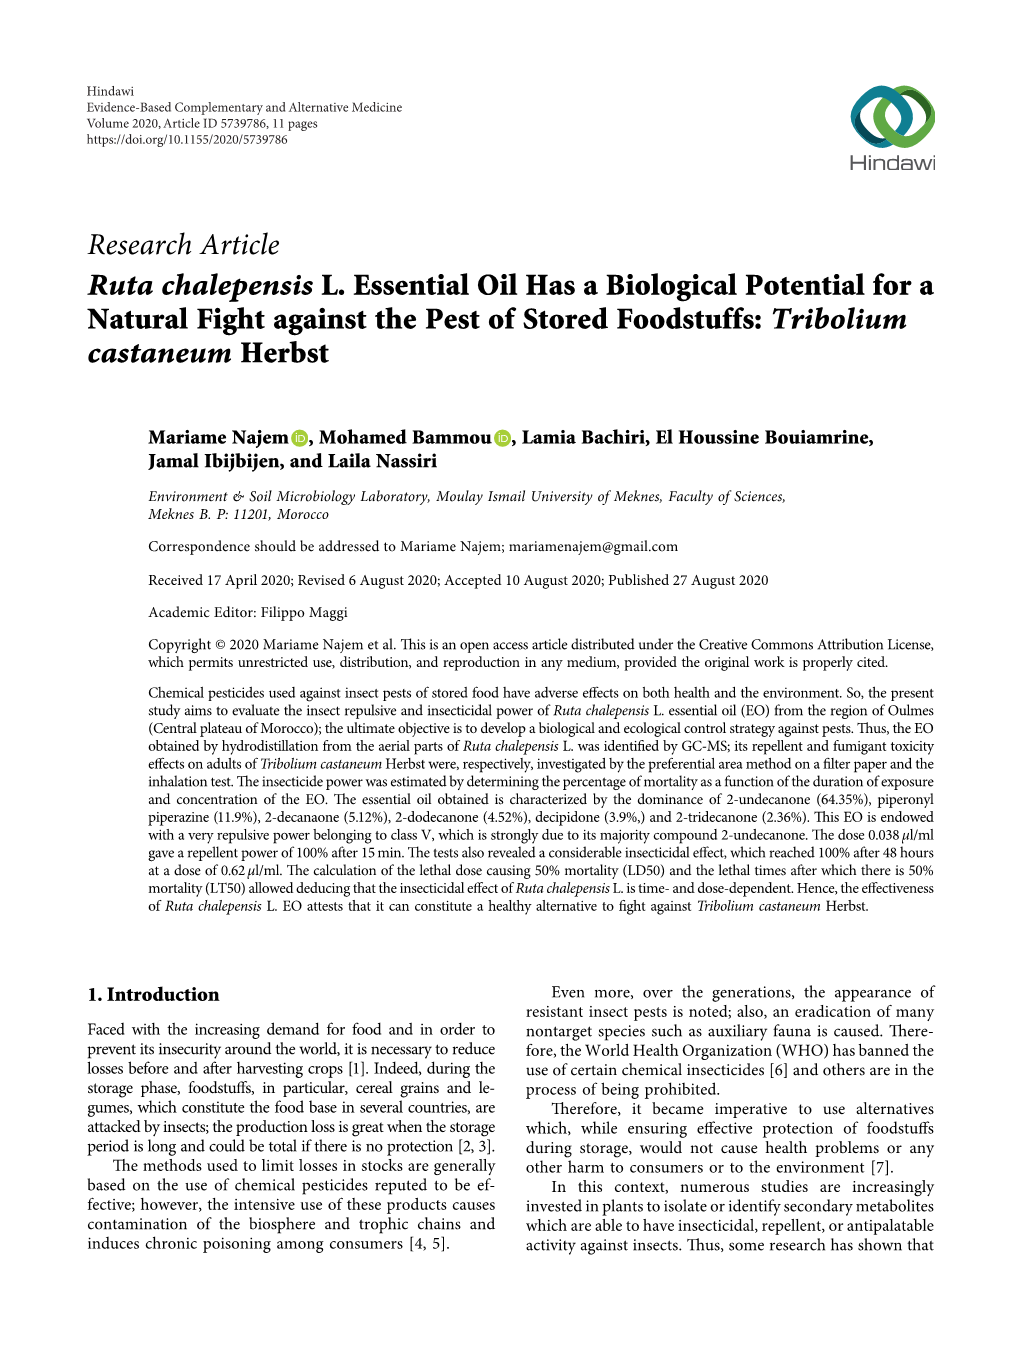 Ruta Chalepensis L. Essential Oil Has a Biological Potential for a Natural Fight Against the Pest of Stored Foodstuffs: Tribolium Castaneum Herbst